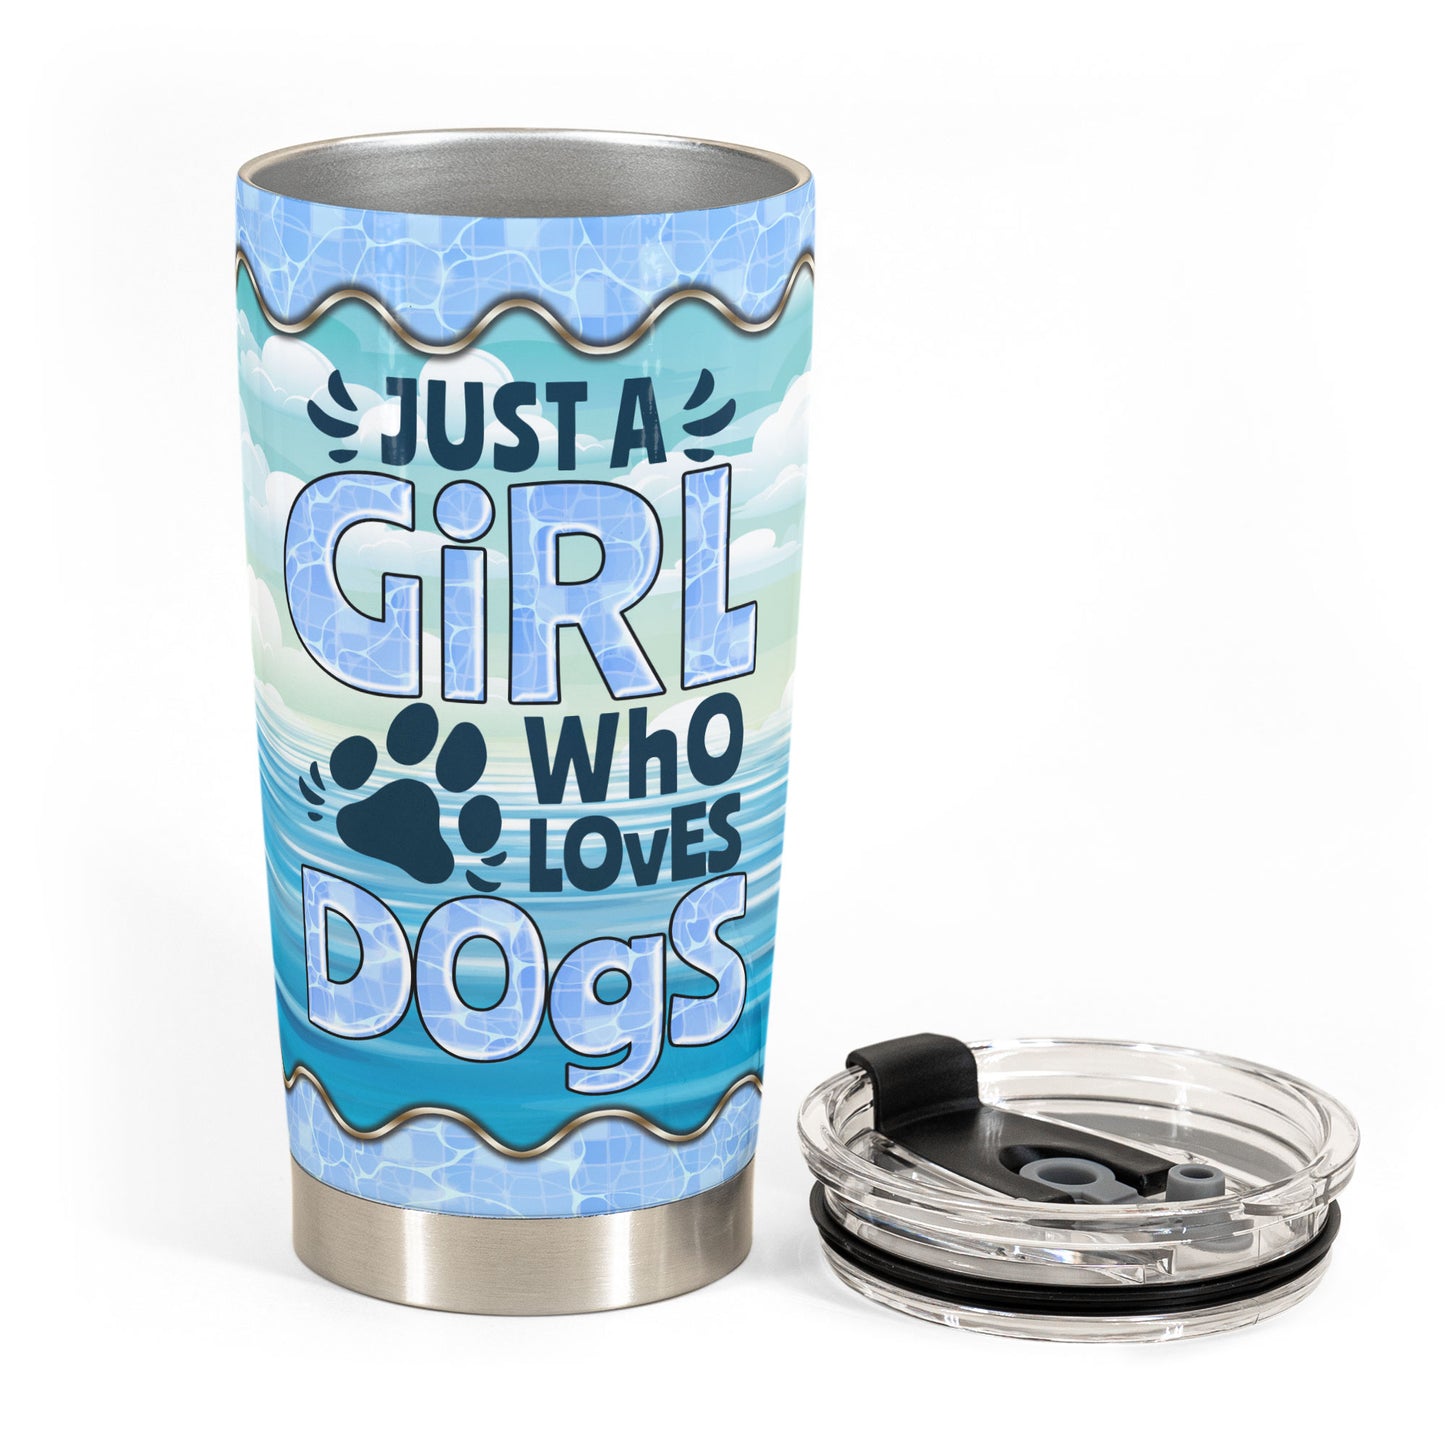 Me & The Dogs - Personalized Tumbler Cup - Birthday Gift For Her, Friends, Sister, Dog Mama, Mom, Dog Lover